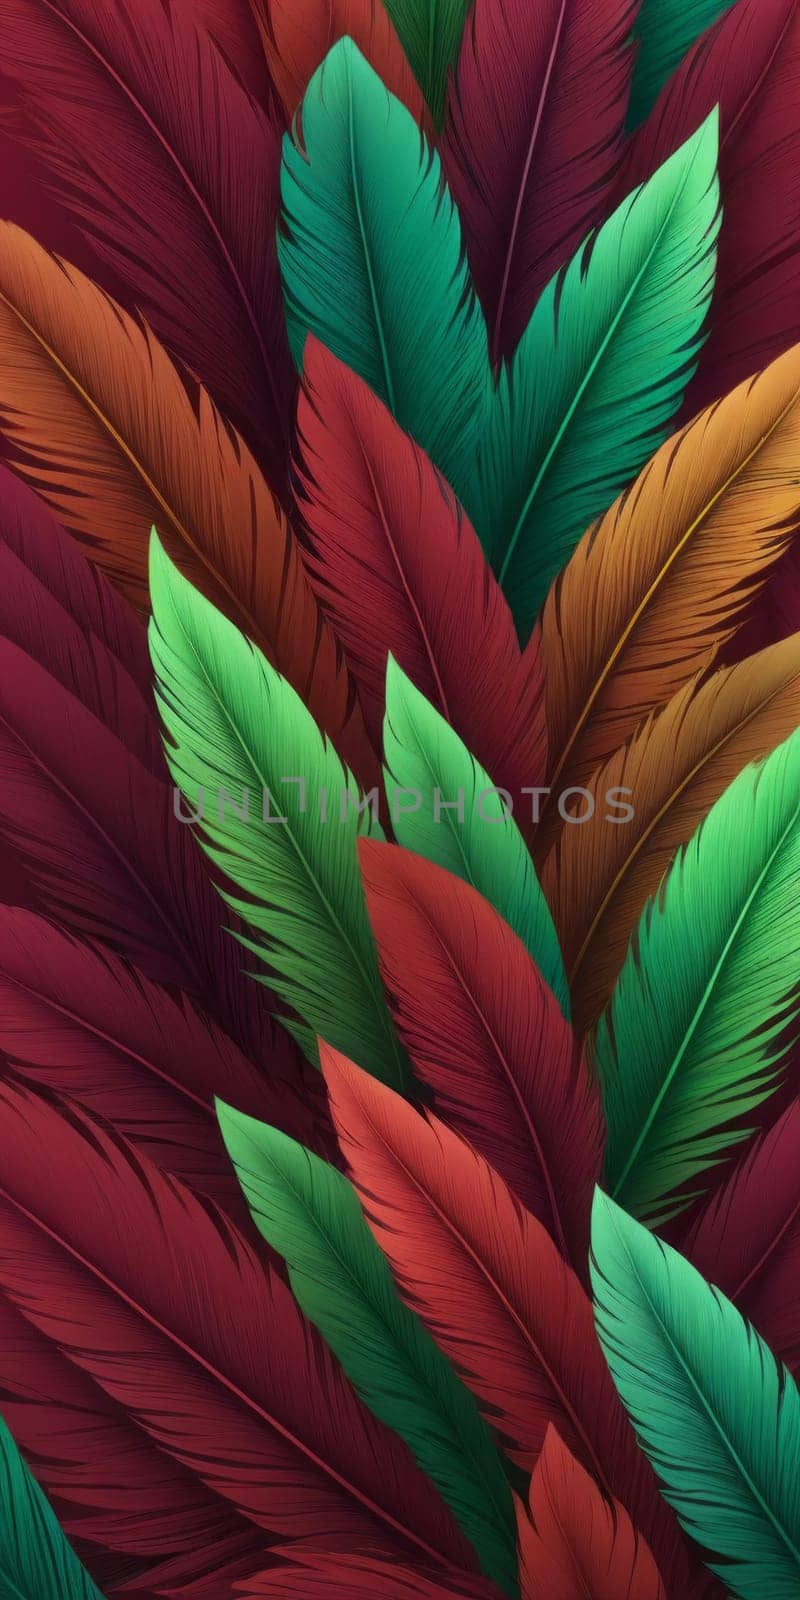 Feathered Shapes in Maroon Lawngreen by nkotlyar